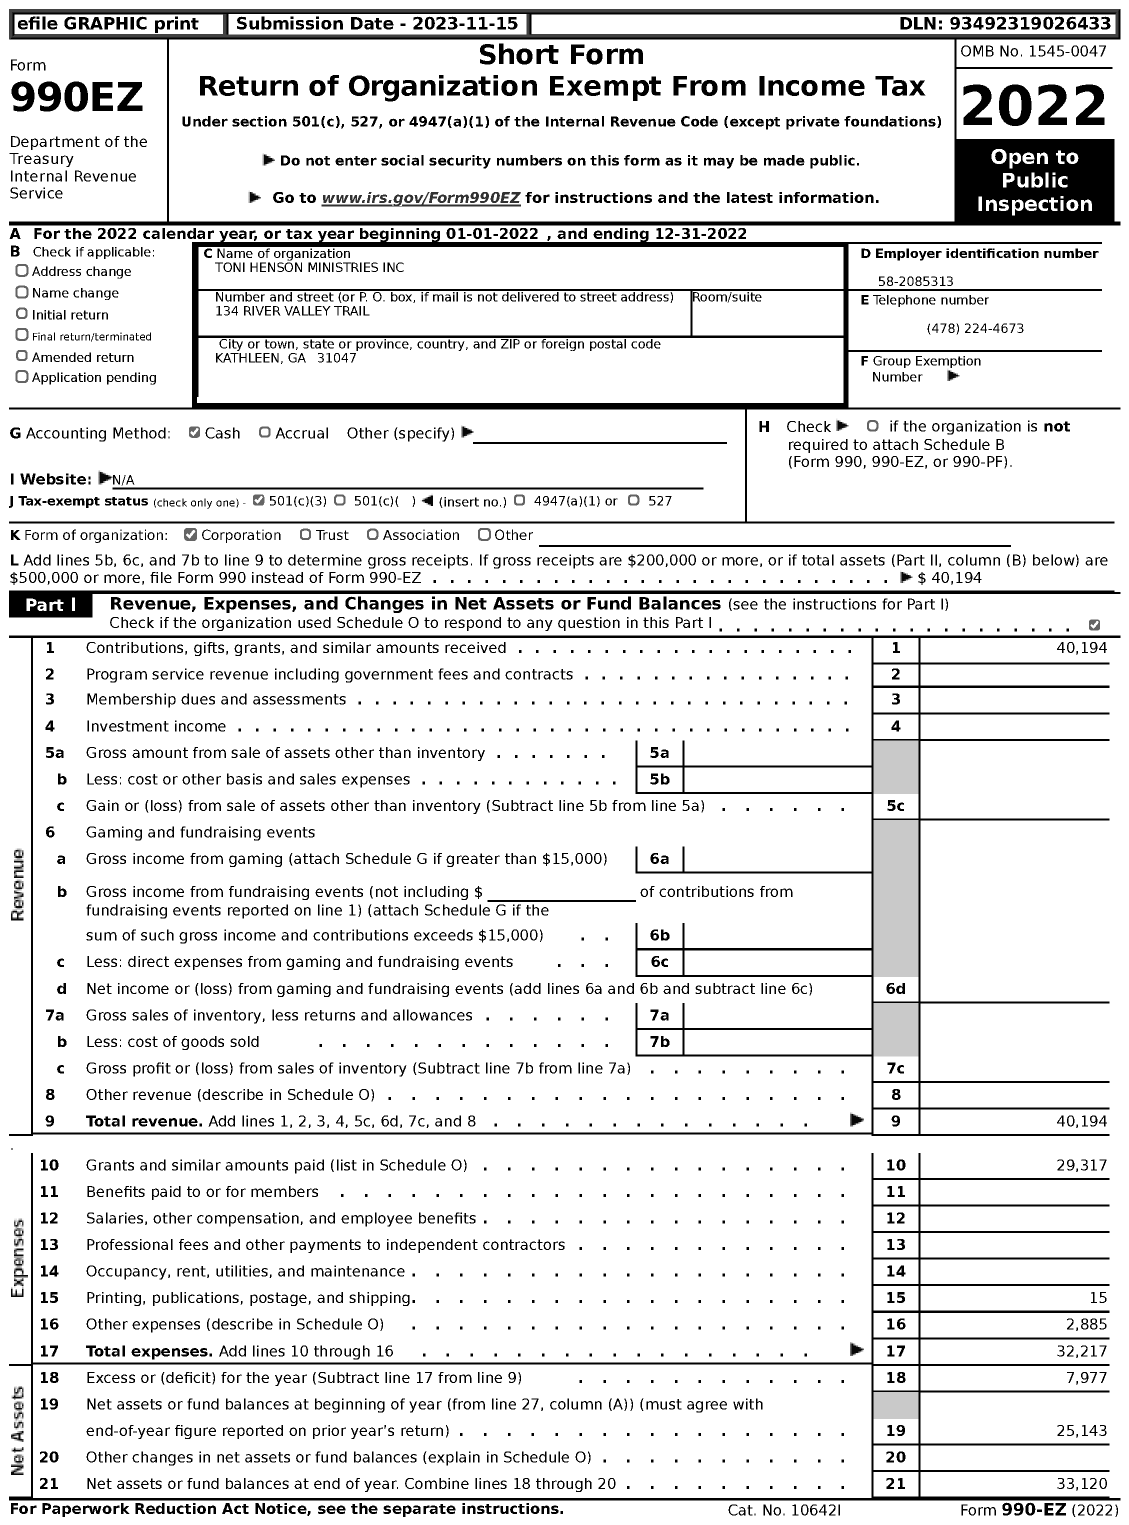 Image of first page of 2022 Form 990EZ for Toni Henson Ministries